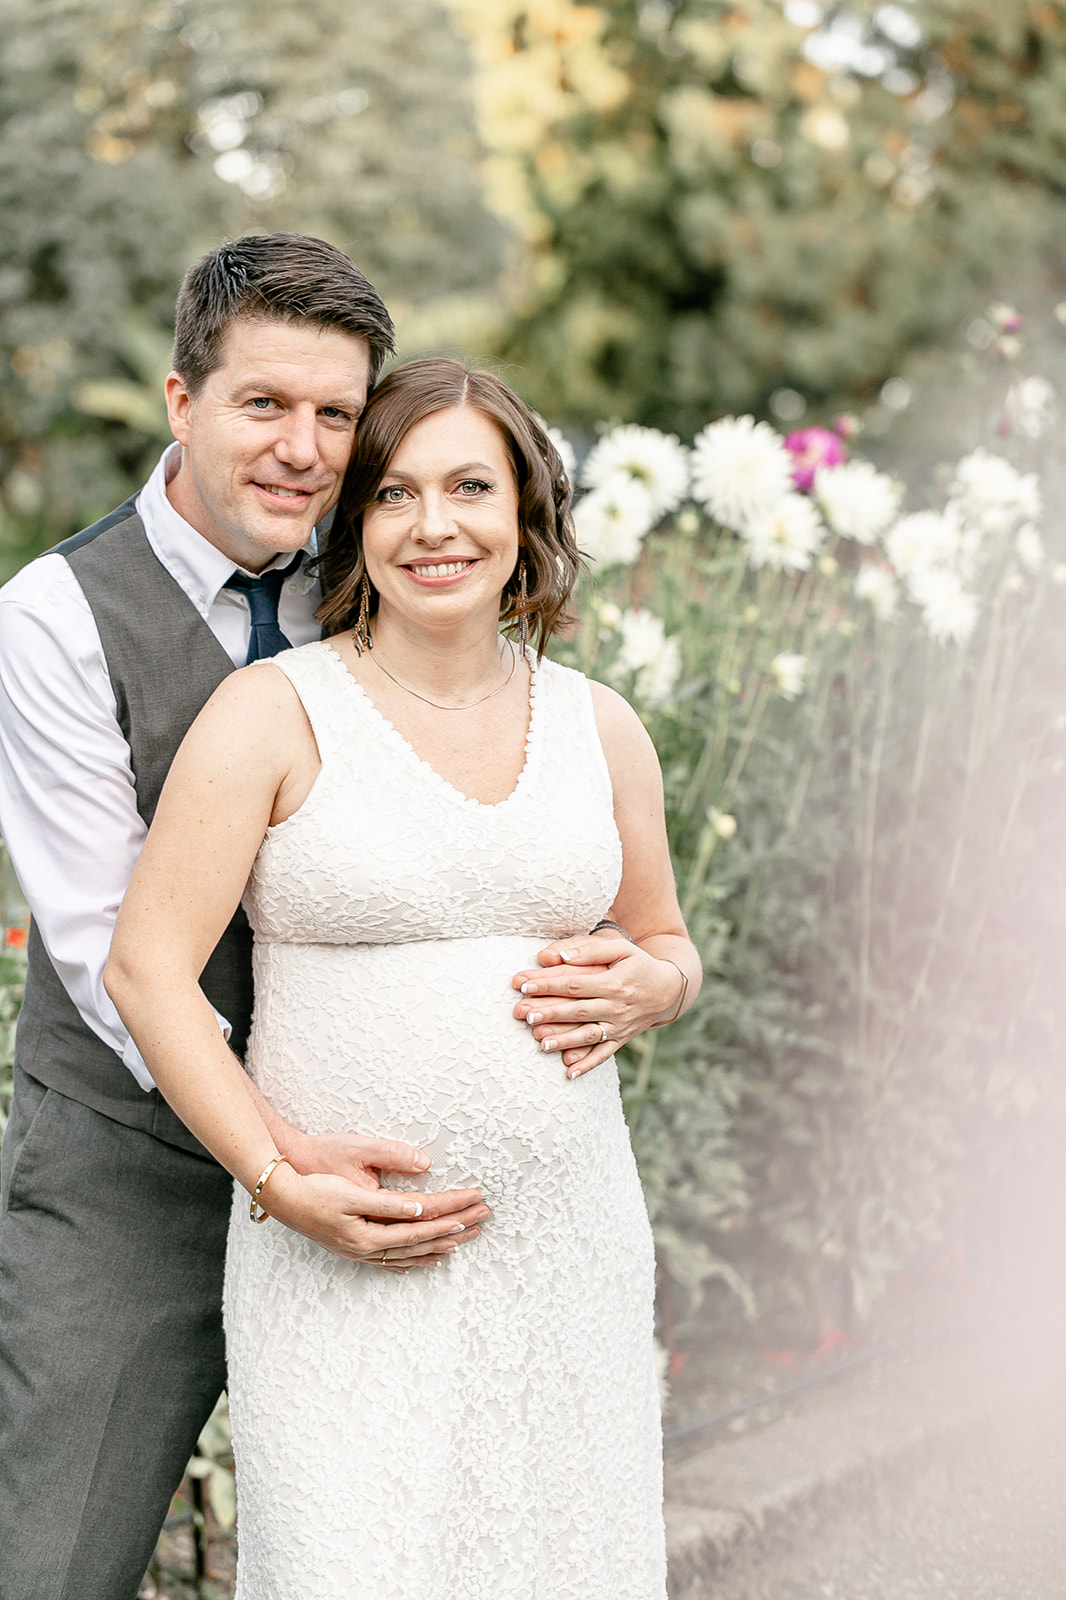 A mother to be and her husband stand together in a flower garden path Portland Date Night Ideas